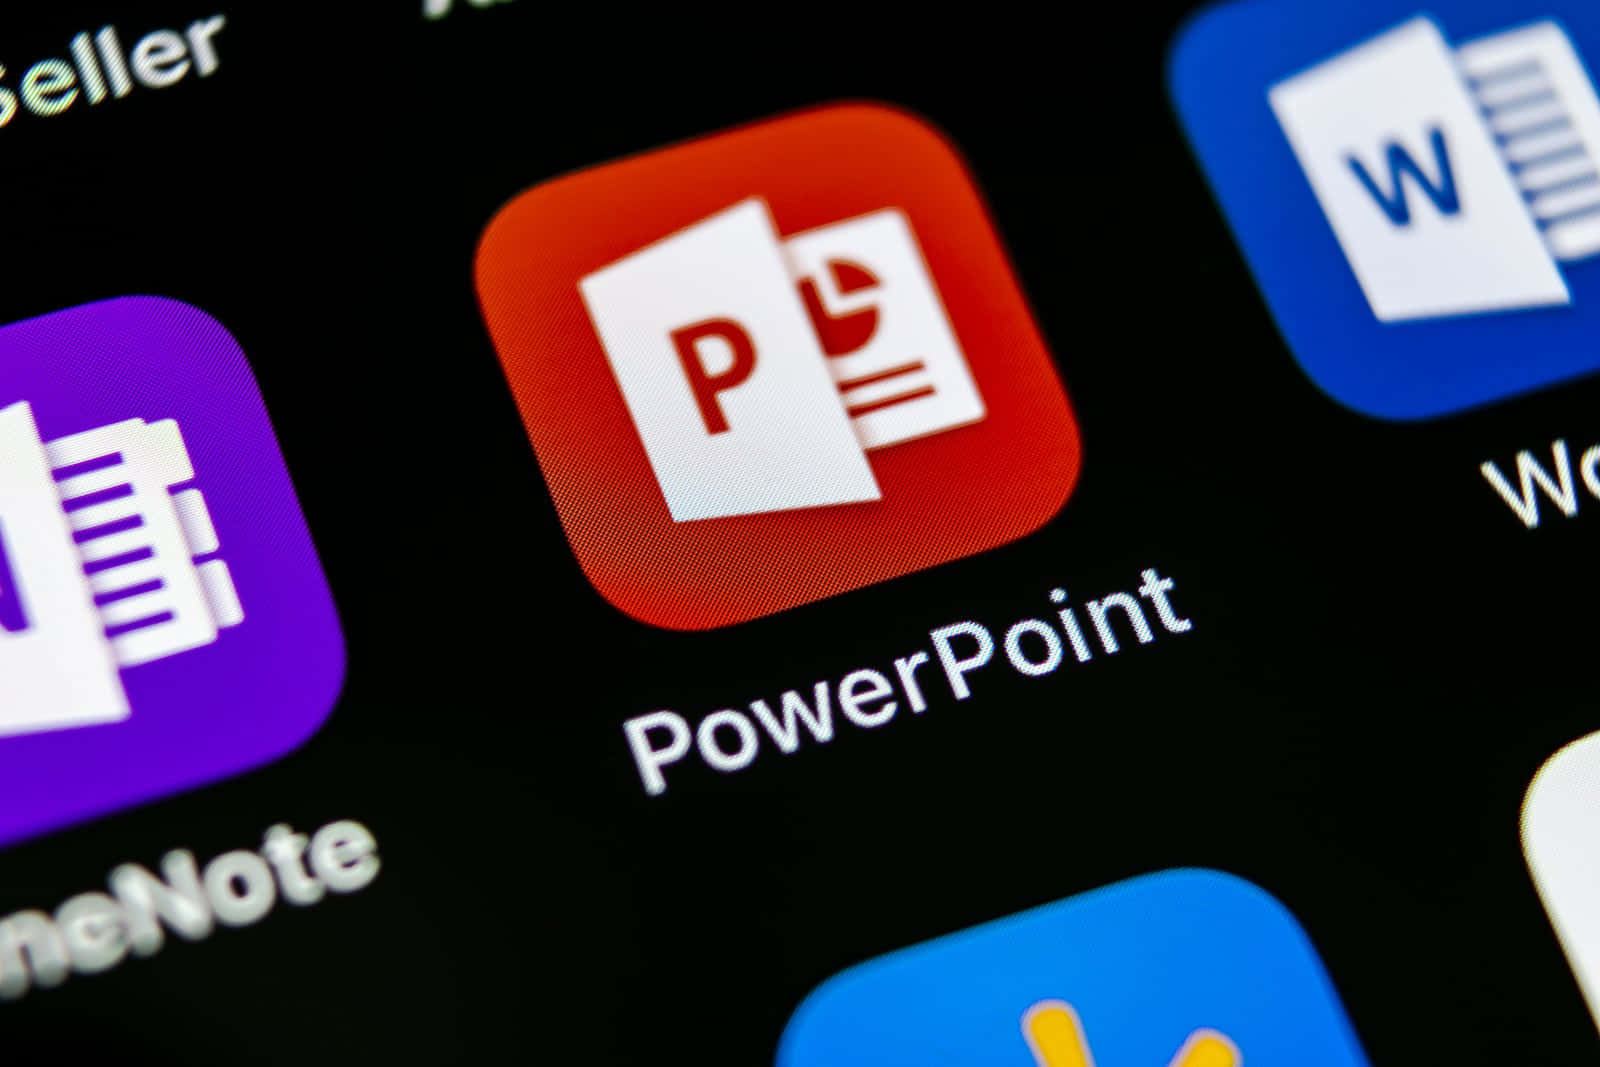 Powerpoint App Icons On A Smartphone